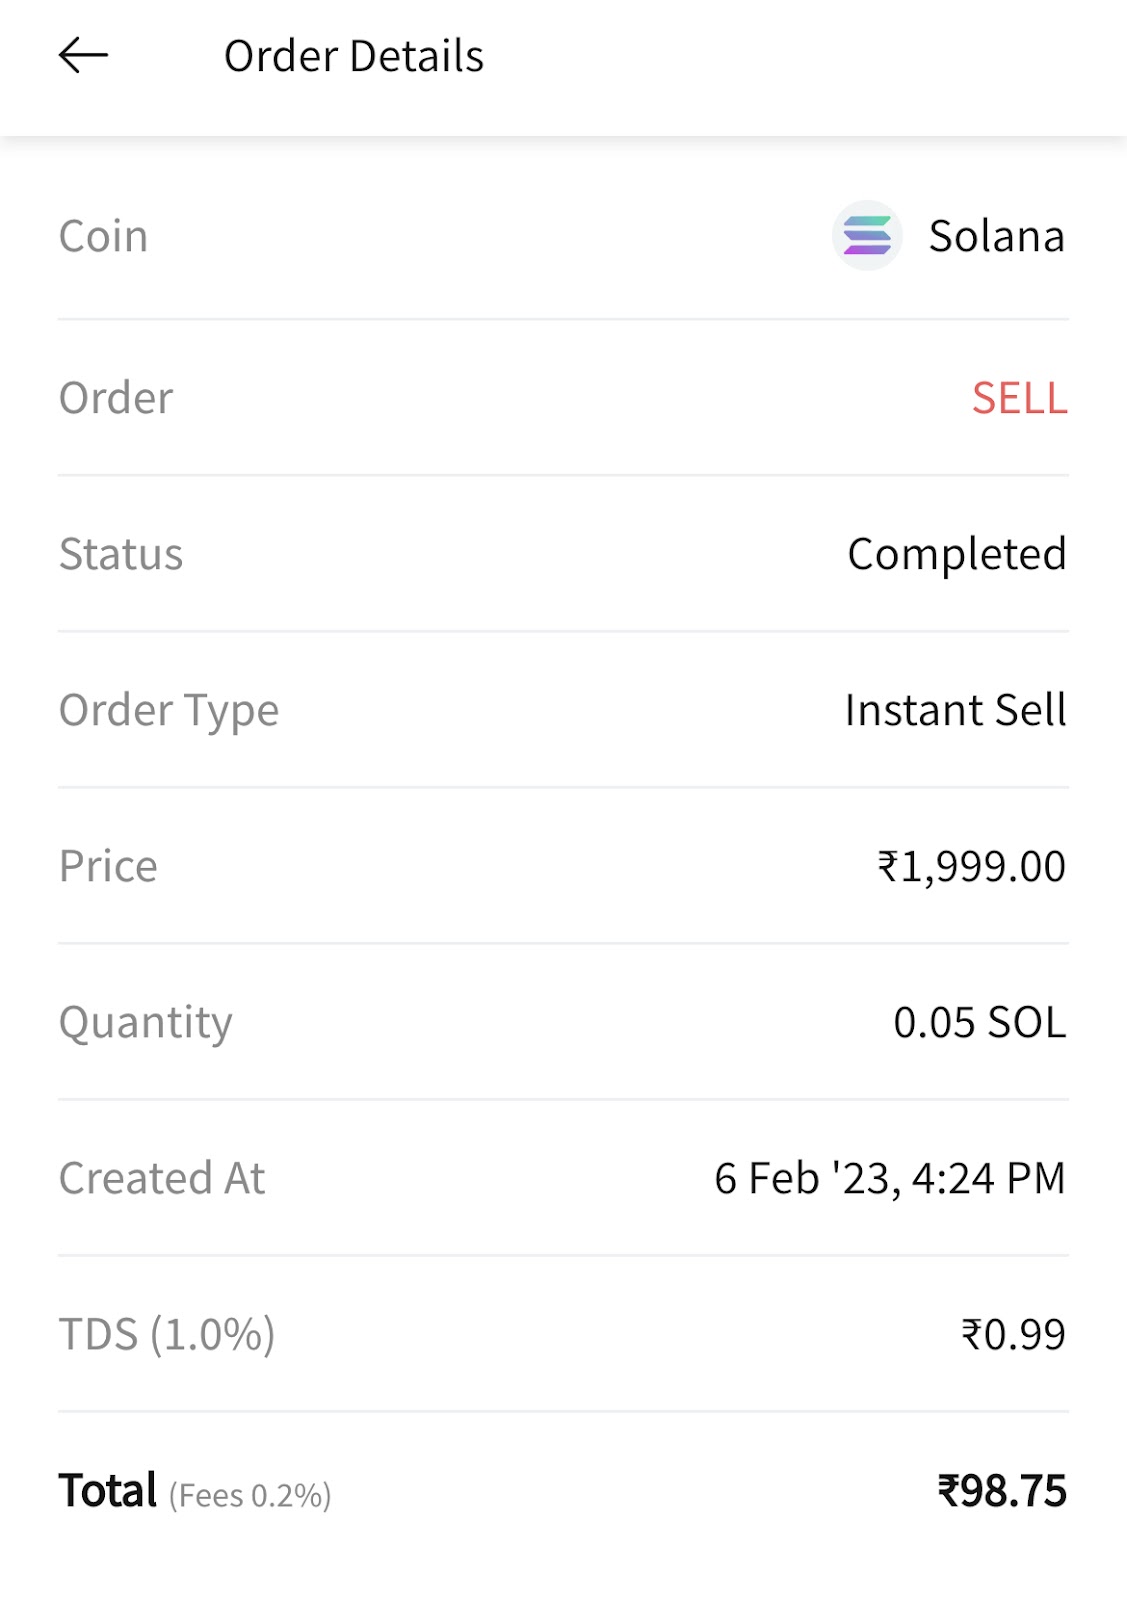 Screenshot from an Indian exchange showing a deduction of TDS